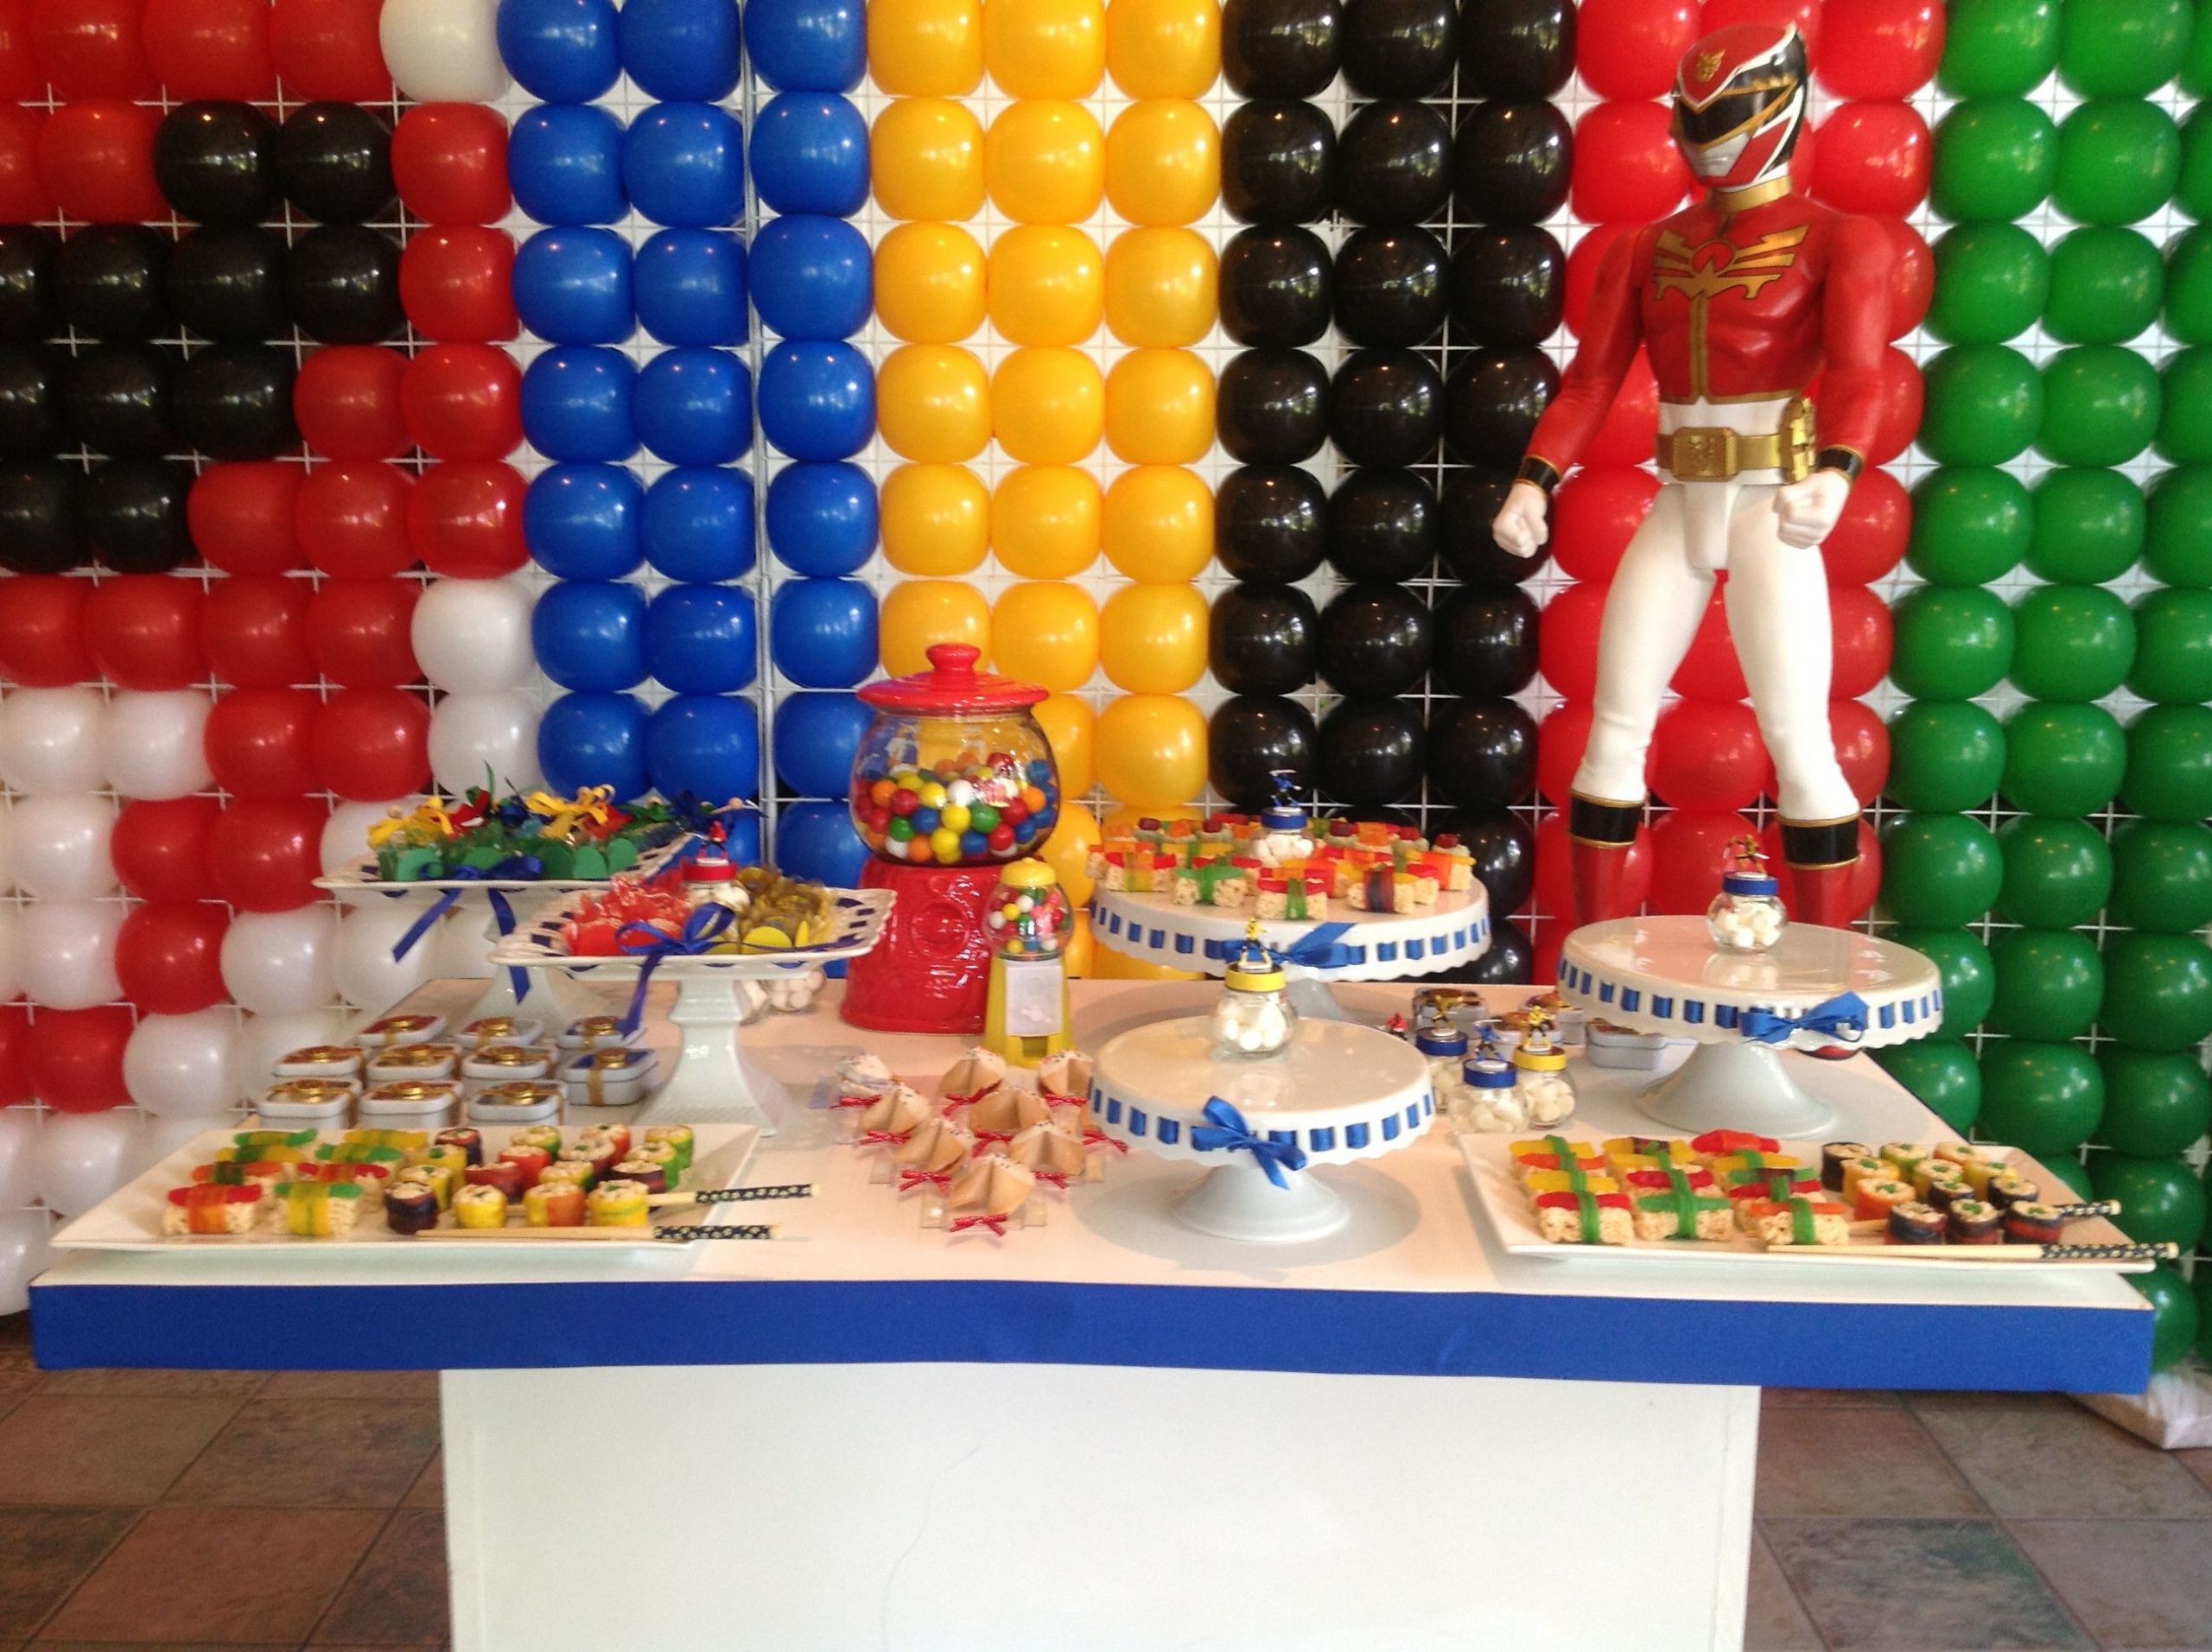 Power Ranger Birthday Party Ideas
 Candy table at a Power Rangers themed kids birthday party